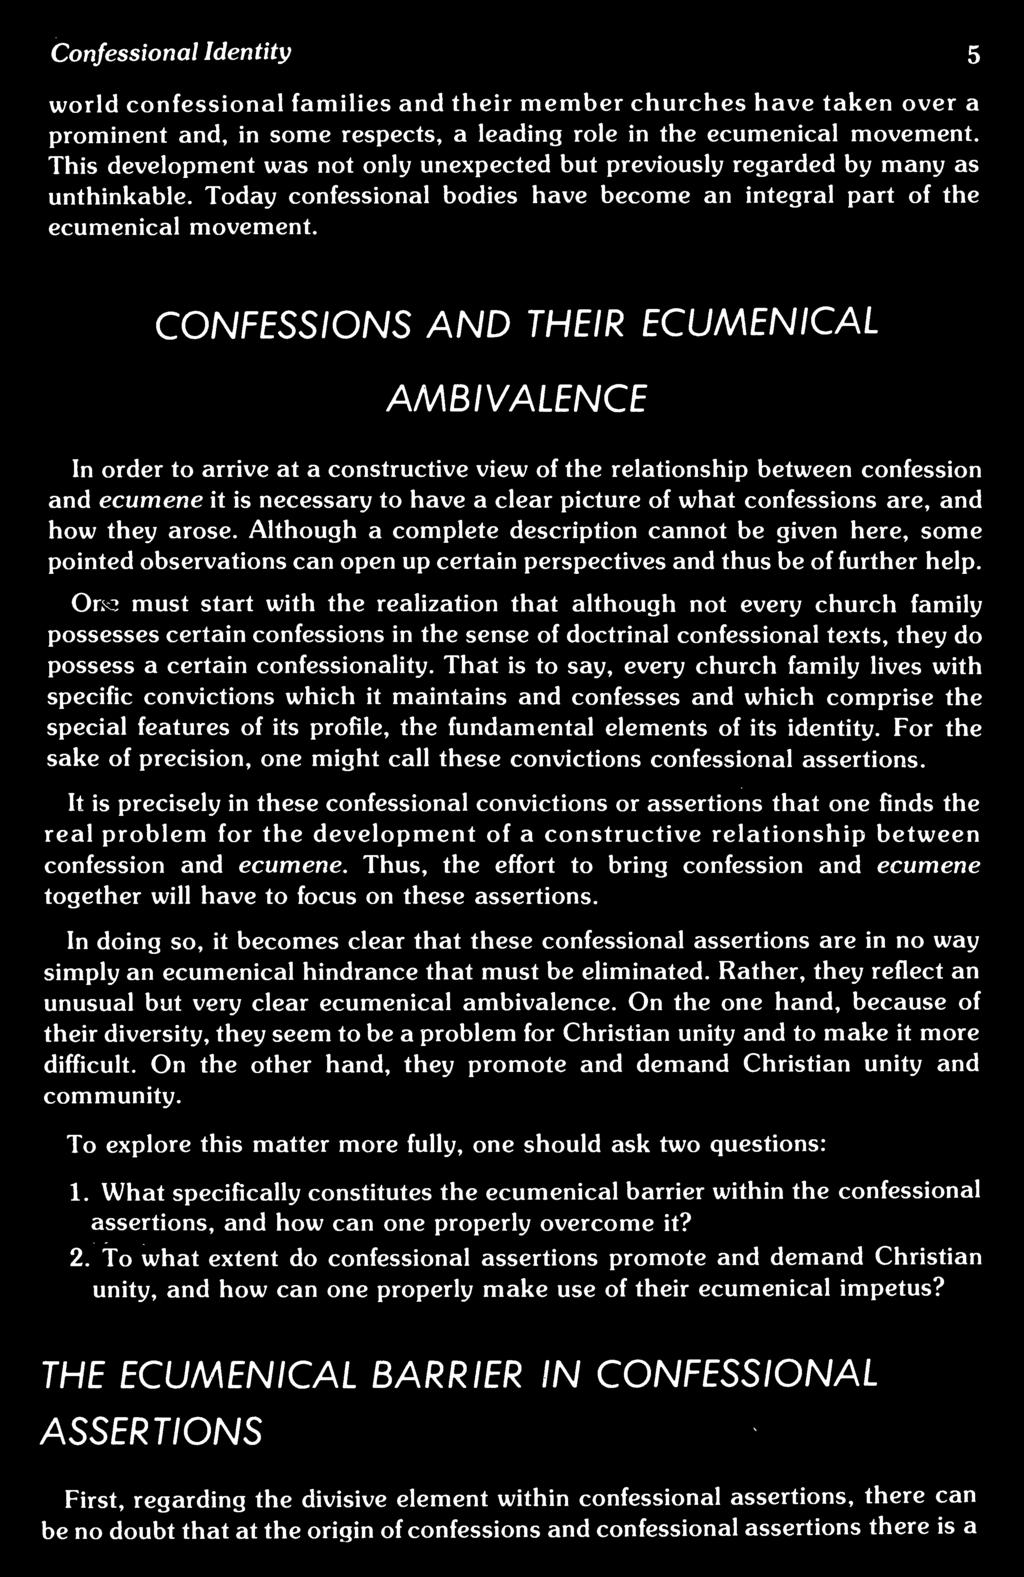 CONFESSIONS AND THEIR ECUMENICAL AMBIVALENCE In order to arrive at a constructive view of the relationship between confession and ecumene it is necessary to have a clear picture of what confessions